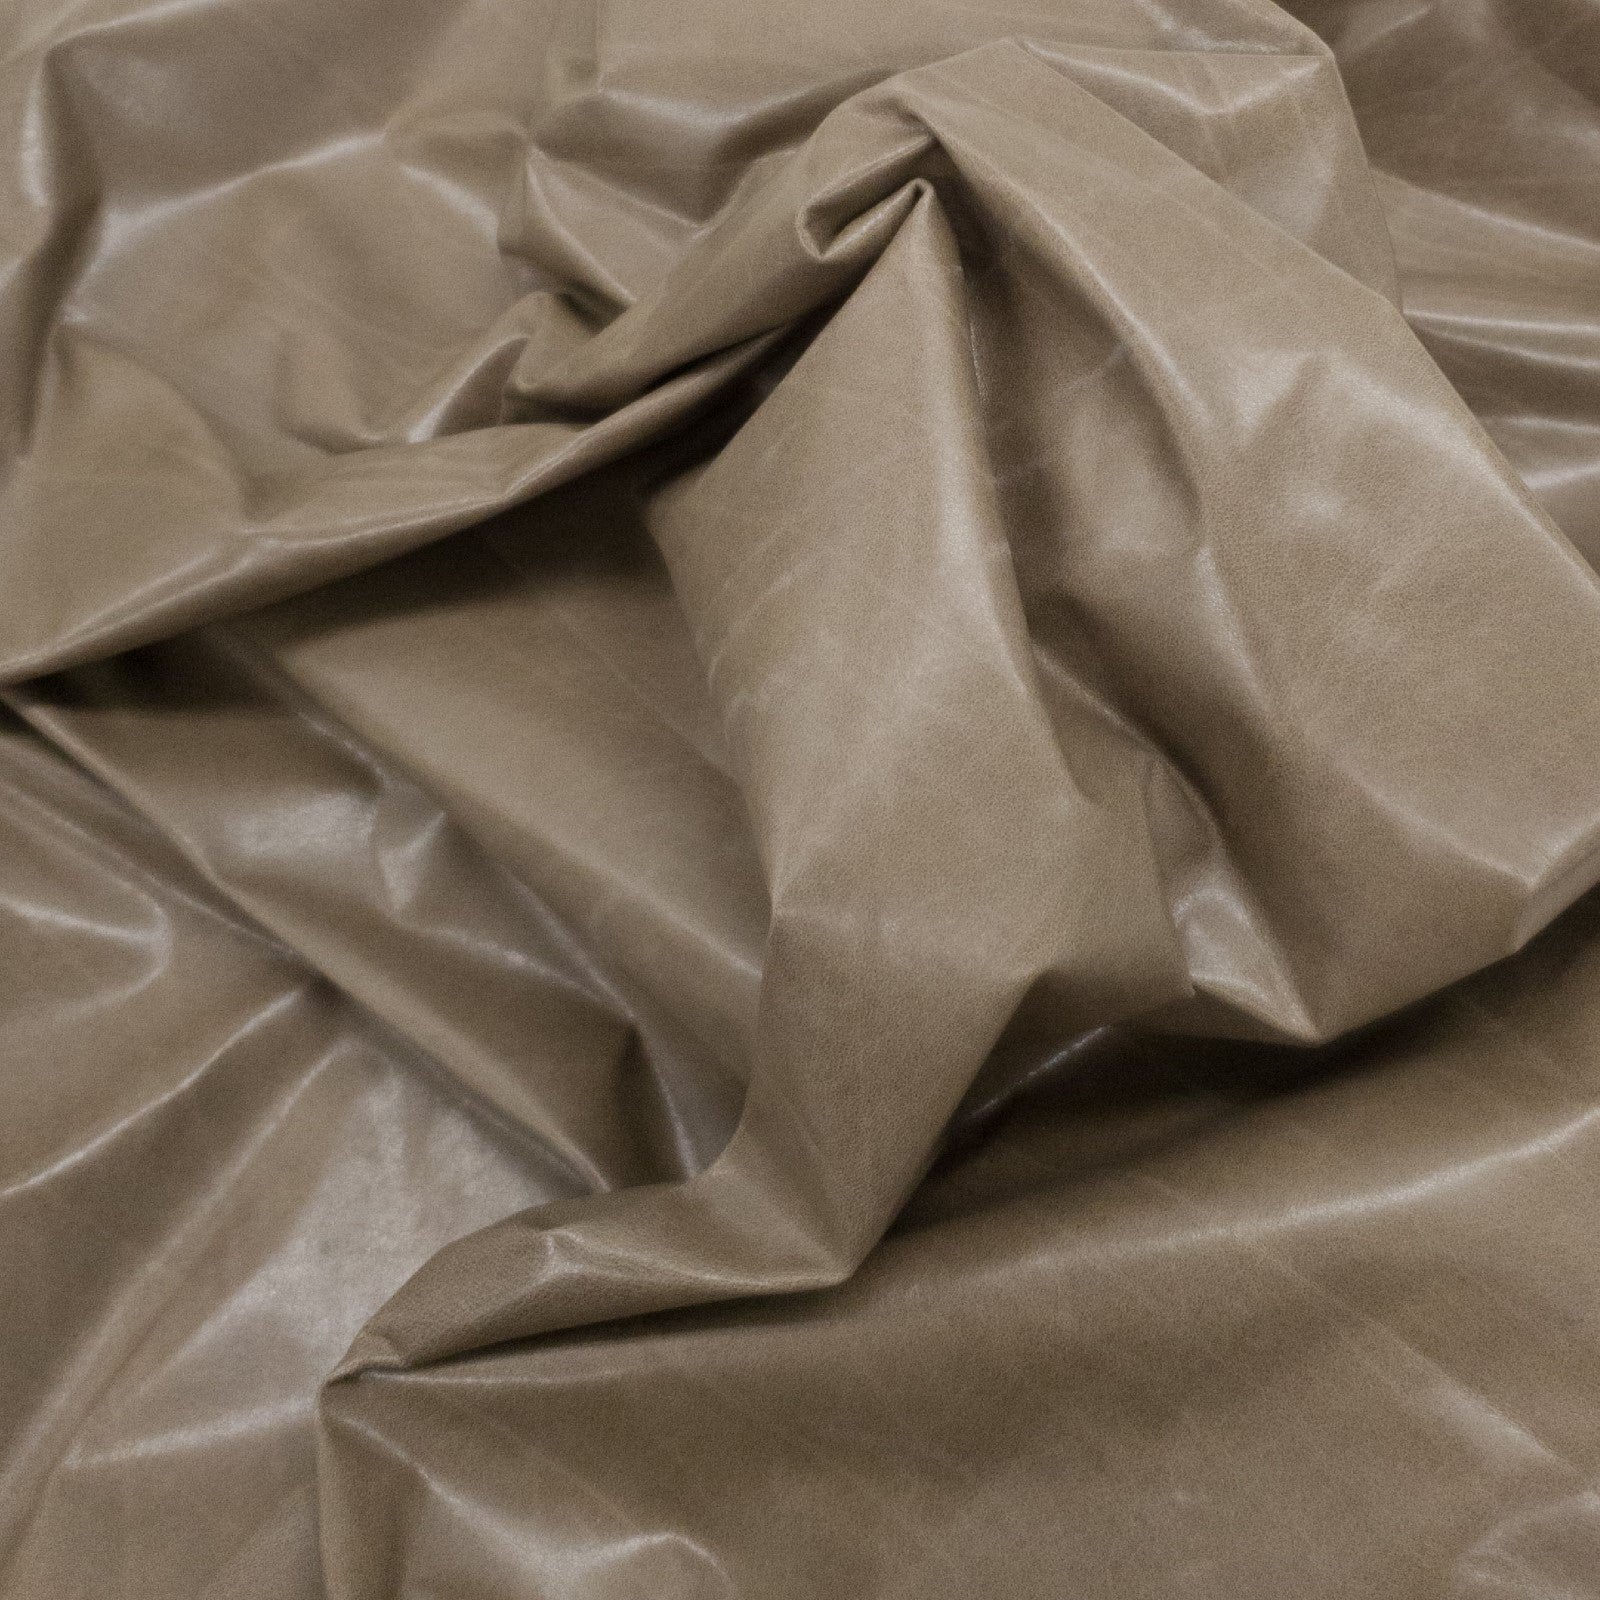 Medium Browns, 3-10 Sq Ft, 1-3 oz, Lamb Hides, Timid Taupe / 3-4 / 1-2 oz (.4-.8 MM) | The Leather Guy